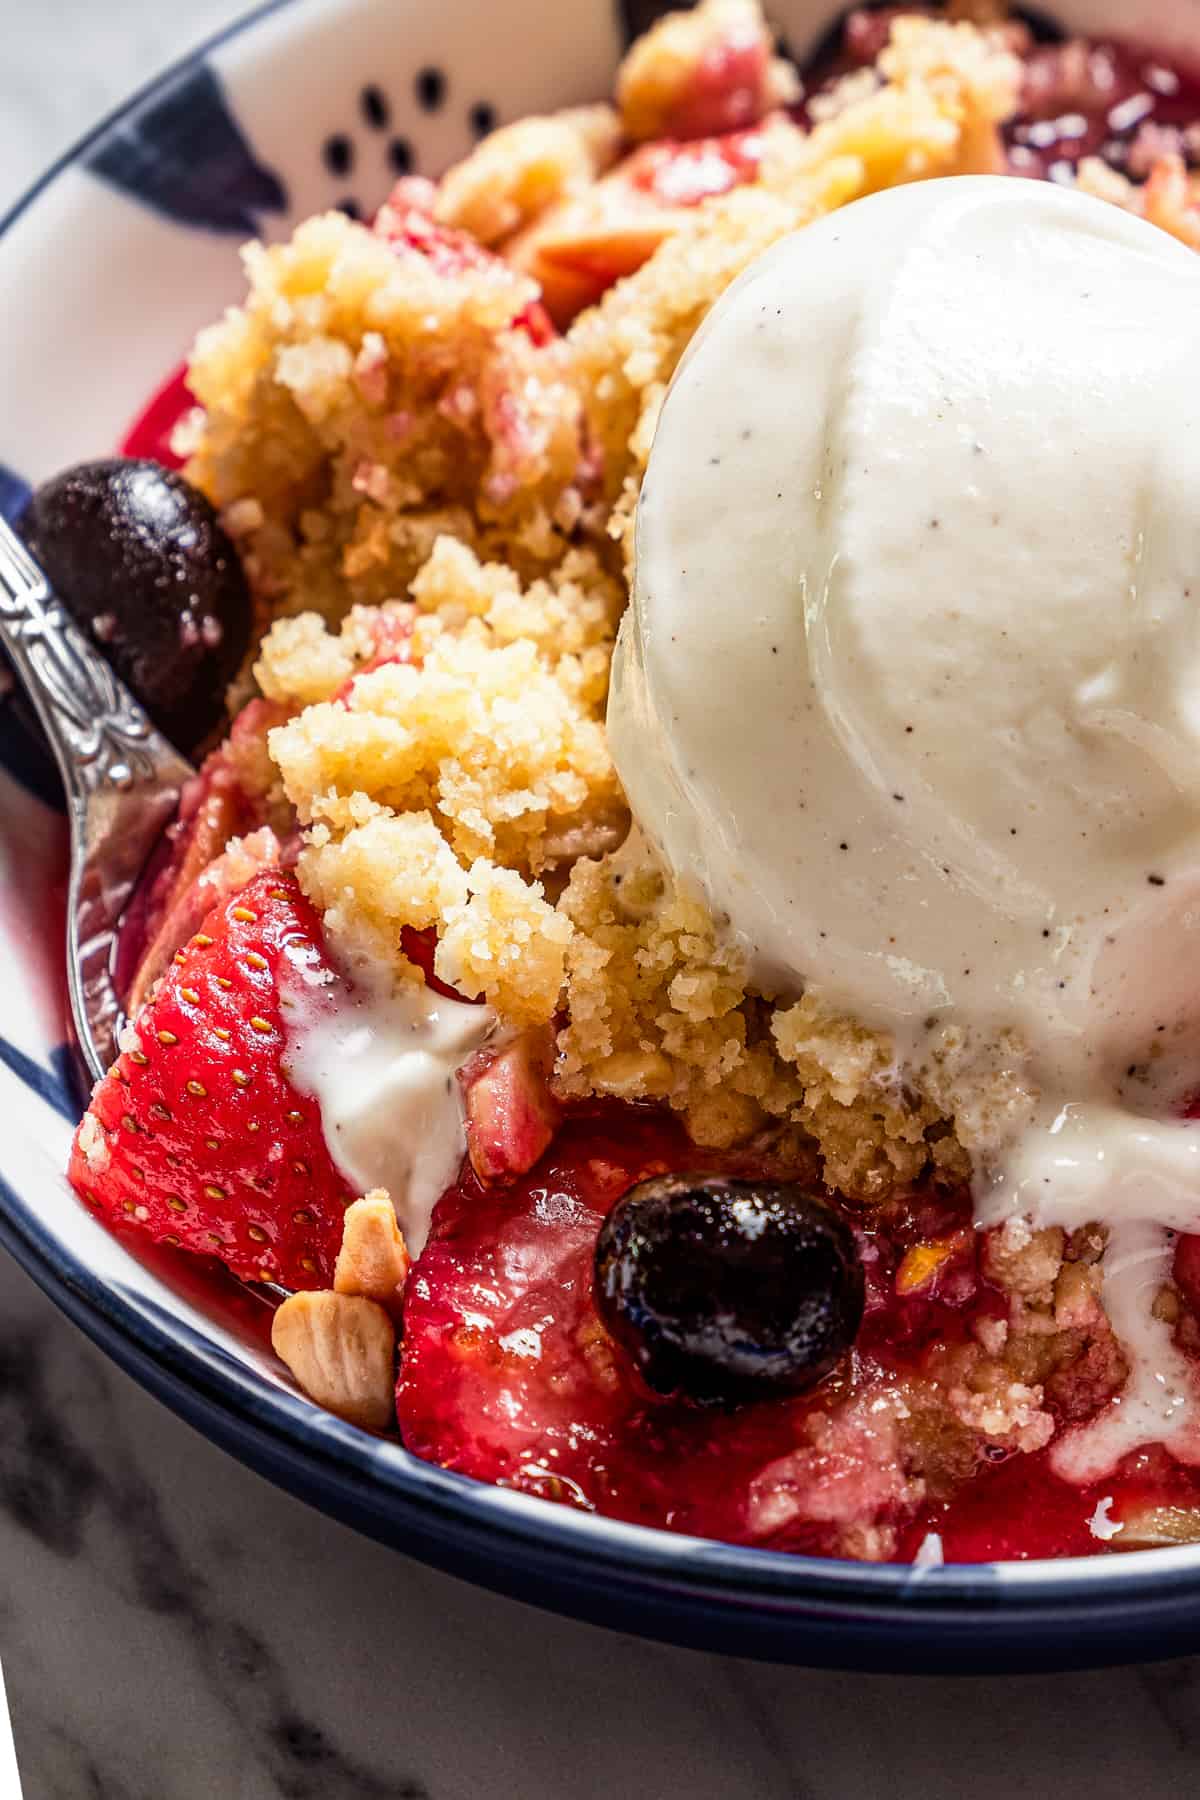 Side shot close-up of a bowl with blueberry strawberry crumble, and a scoop of vanilla ice cream on top.